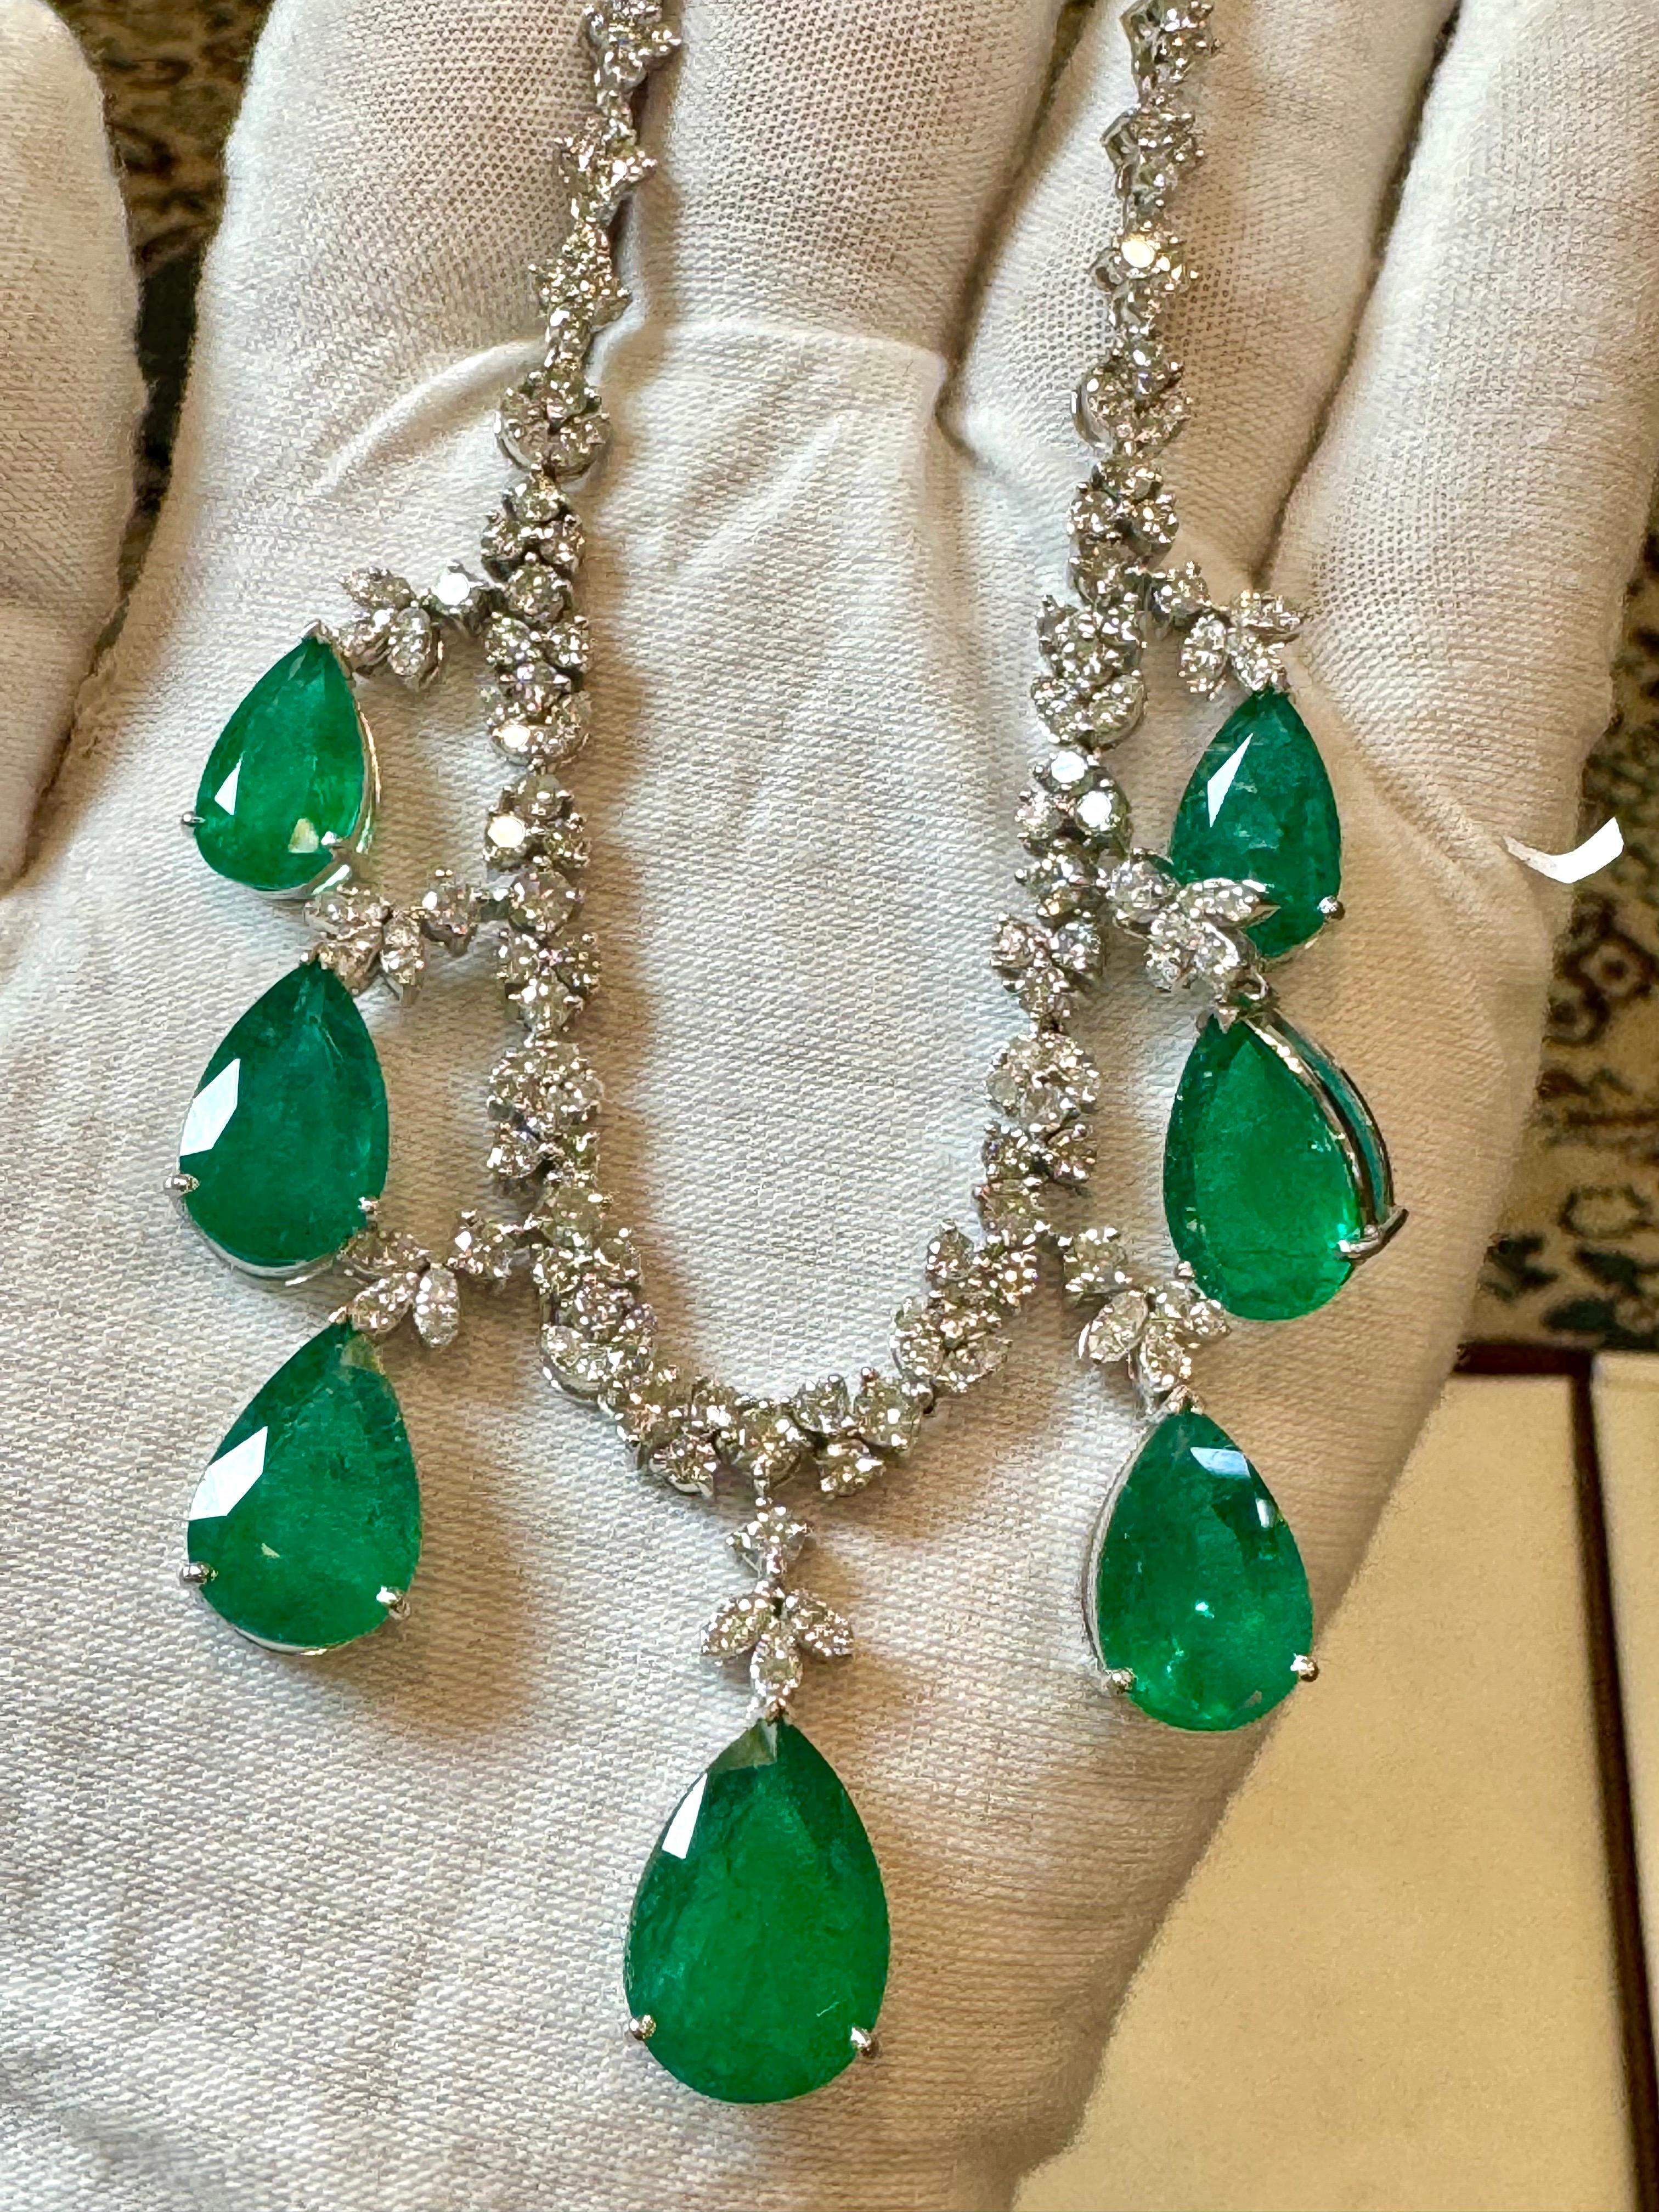 GIA Certified Pear Zambian Emerald & Diamond Bridal Drop Necklace 14 Karat white  Gold
14 karat white gold   natural Zambian  and diamond  necklace, consisting of 7 Pear shape Emeralds  with a total carat weigh of  35 carats, with  round brilliant